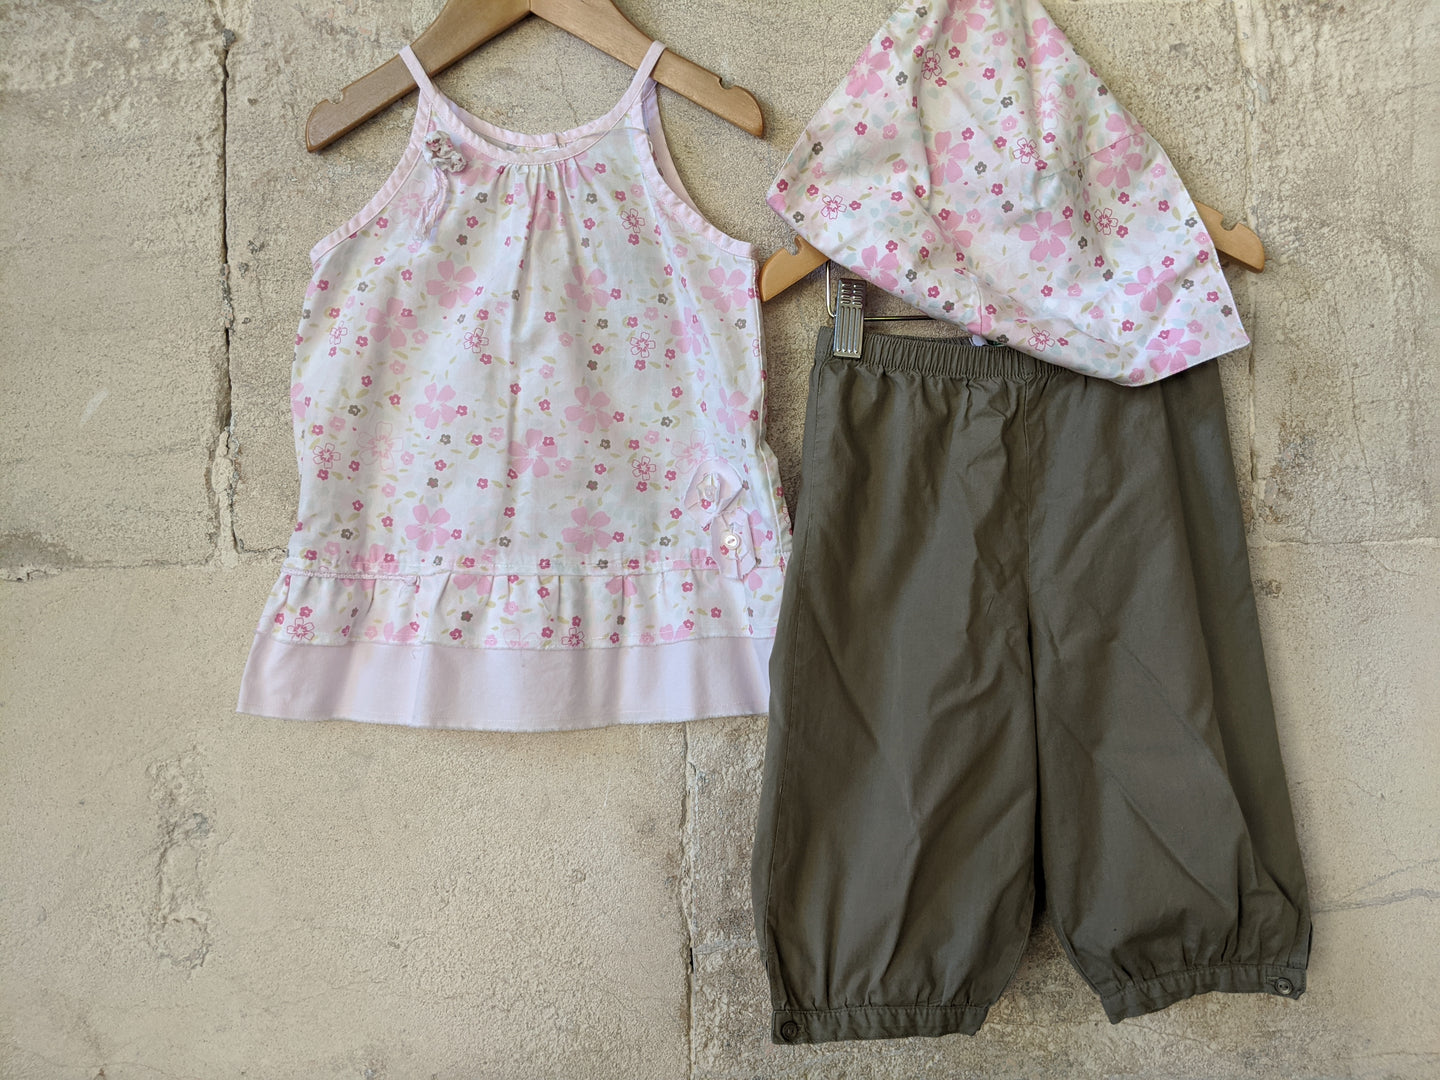 Vertbaudet Kids Clothes Sale Quality French Brand Children's Baby Preloved Clothing